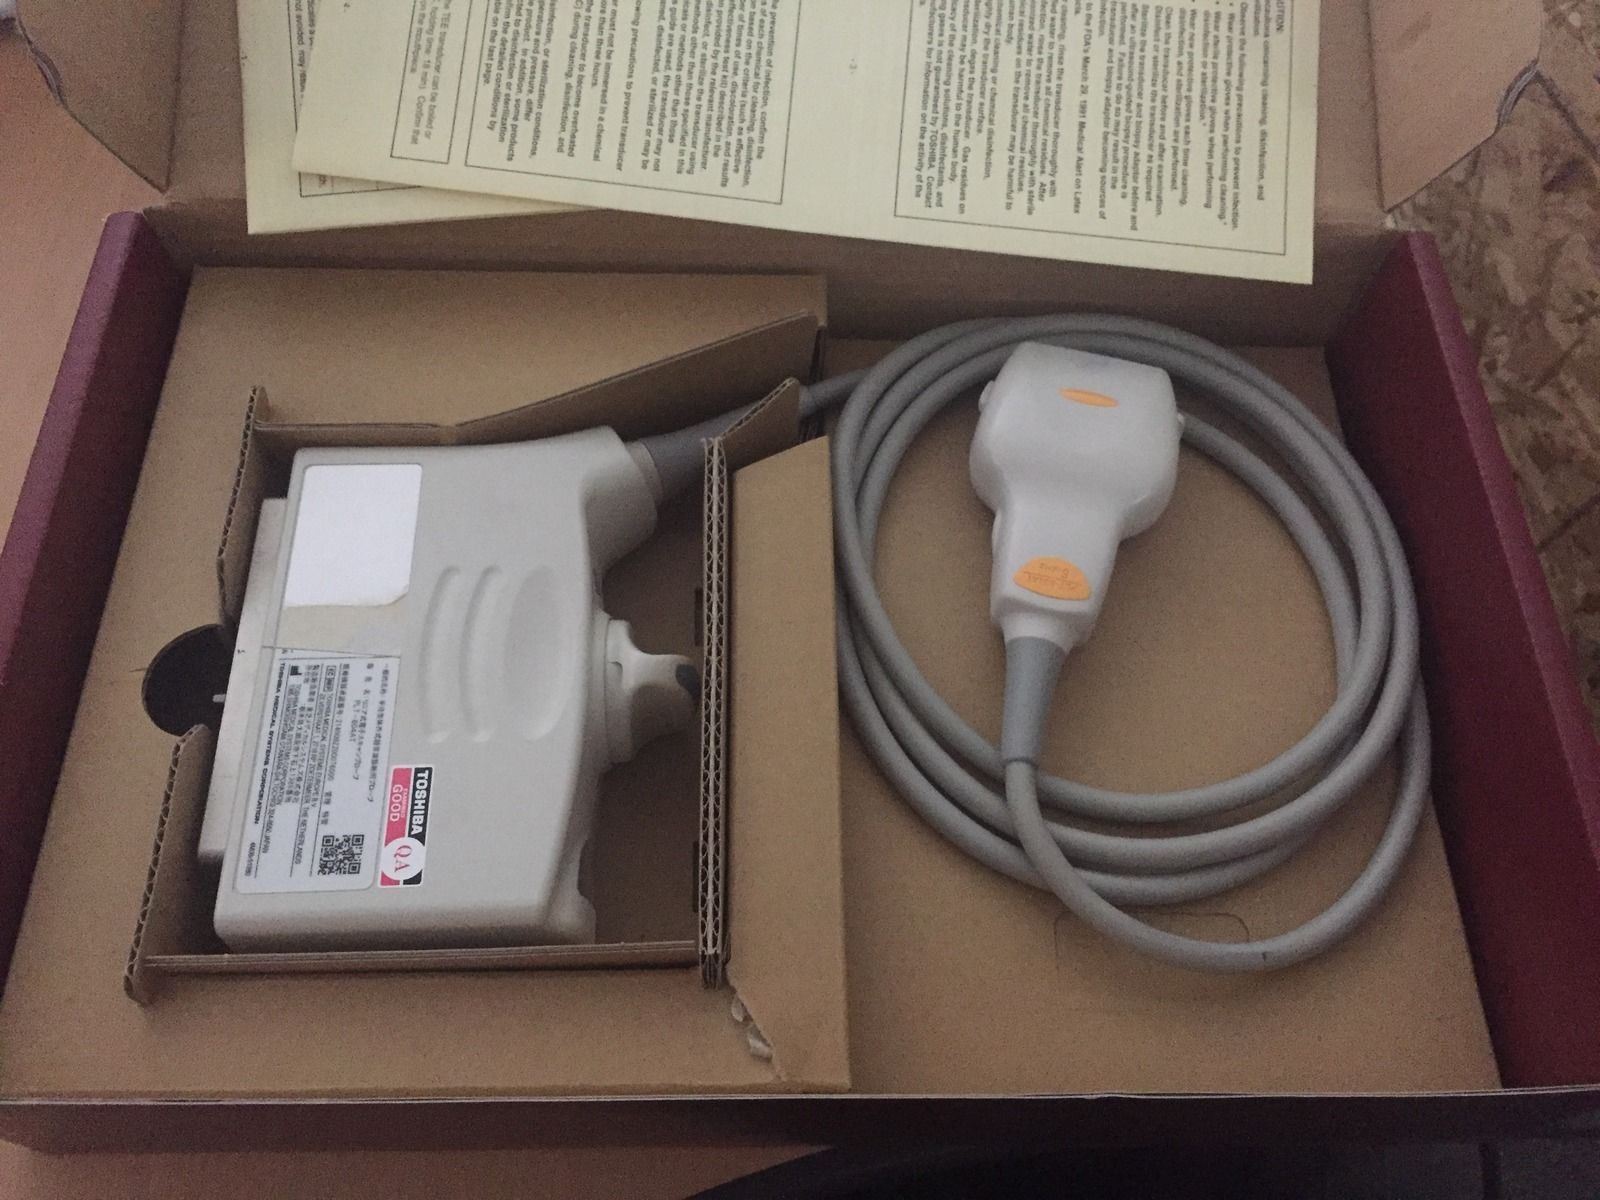 Toshiba Aplio PLT-604AT 6.0MHz Linear Ultrasound Transducer Medical Equipment DIAGNOSTIC ULTRASOUND MACHINES FOR SALE